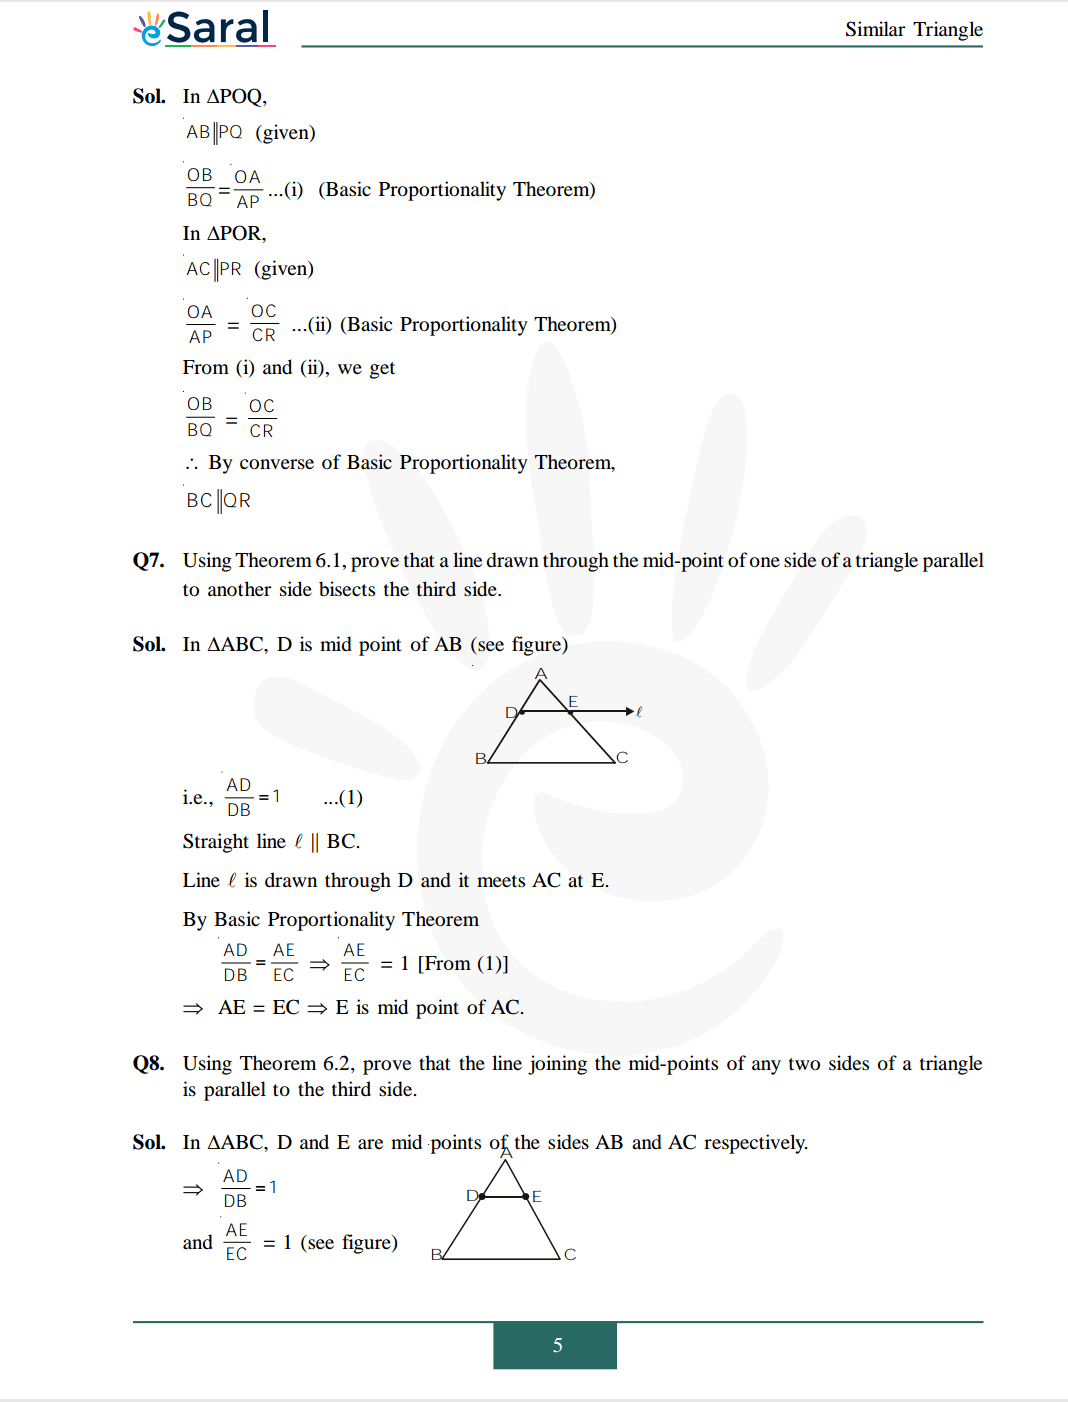 Class 10 Maths Chapter 6 exercise 6.2 solutions Image 4